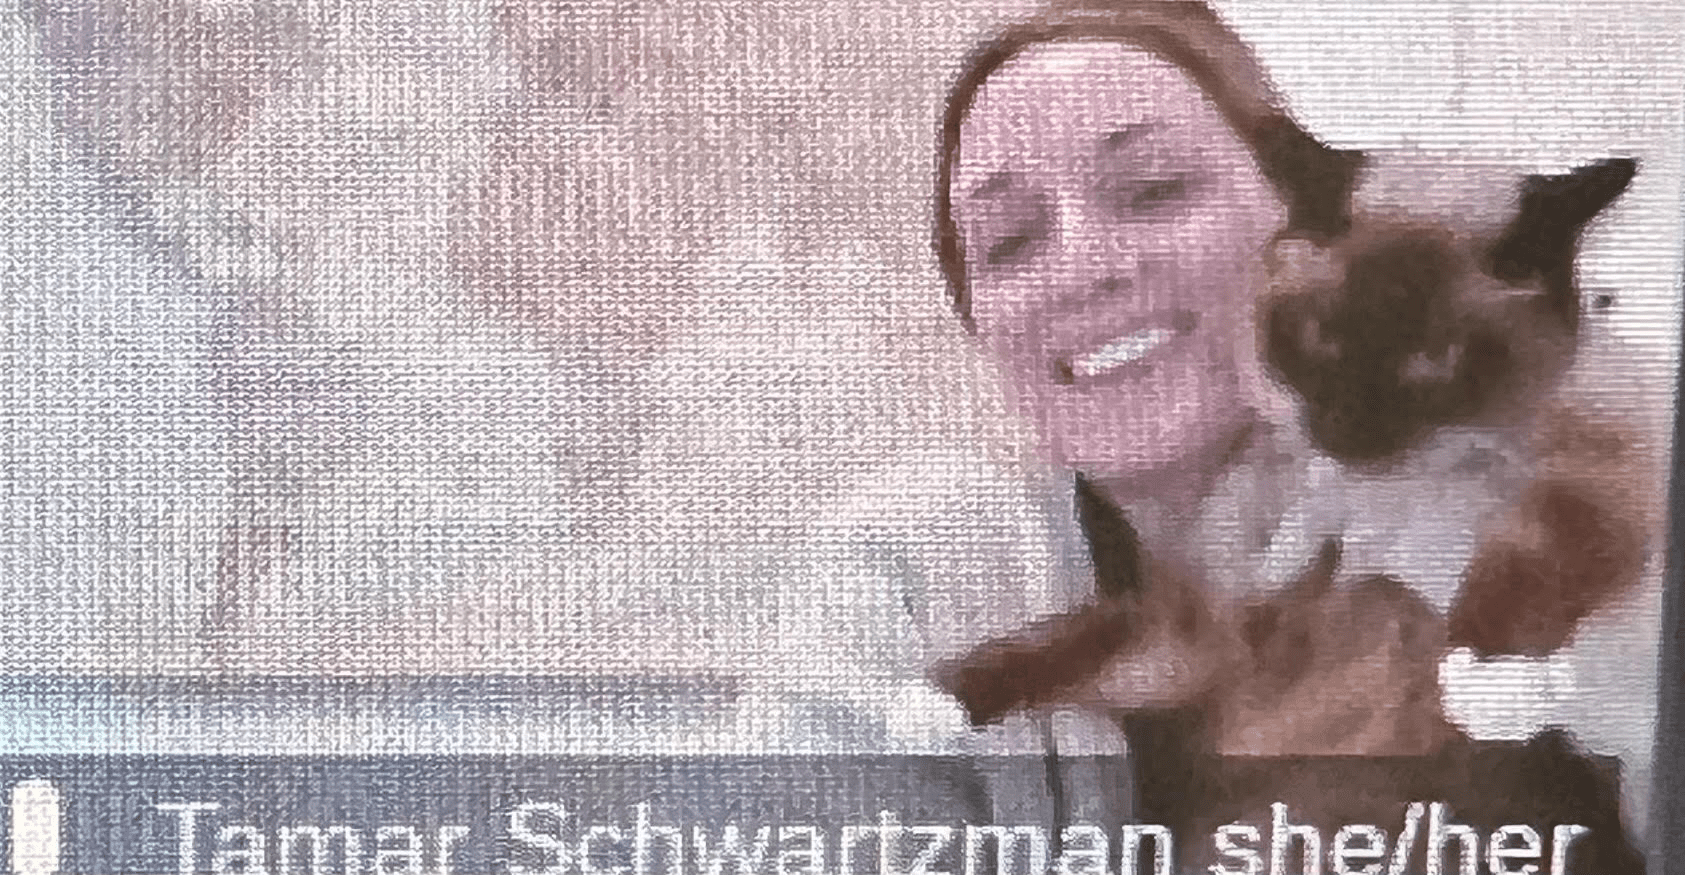 Ms. Shwartzman poses on Zoom with her cat. She has her hair tied back, wearing a cardigan sweater. She holds her Siamese colored cat next to her. The photo is a screenshot off of Zoom. The quality is slightly blurred but viewable.